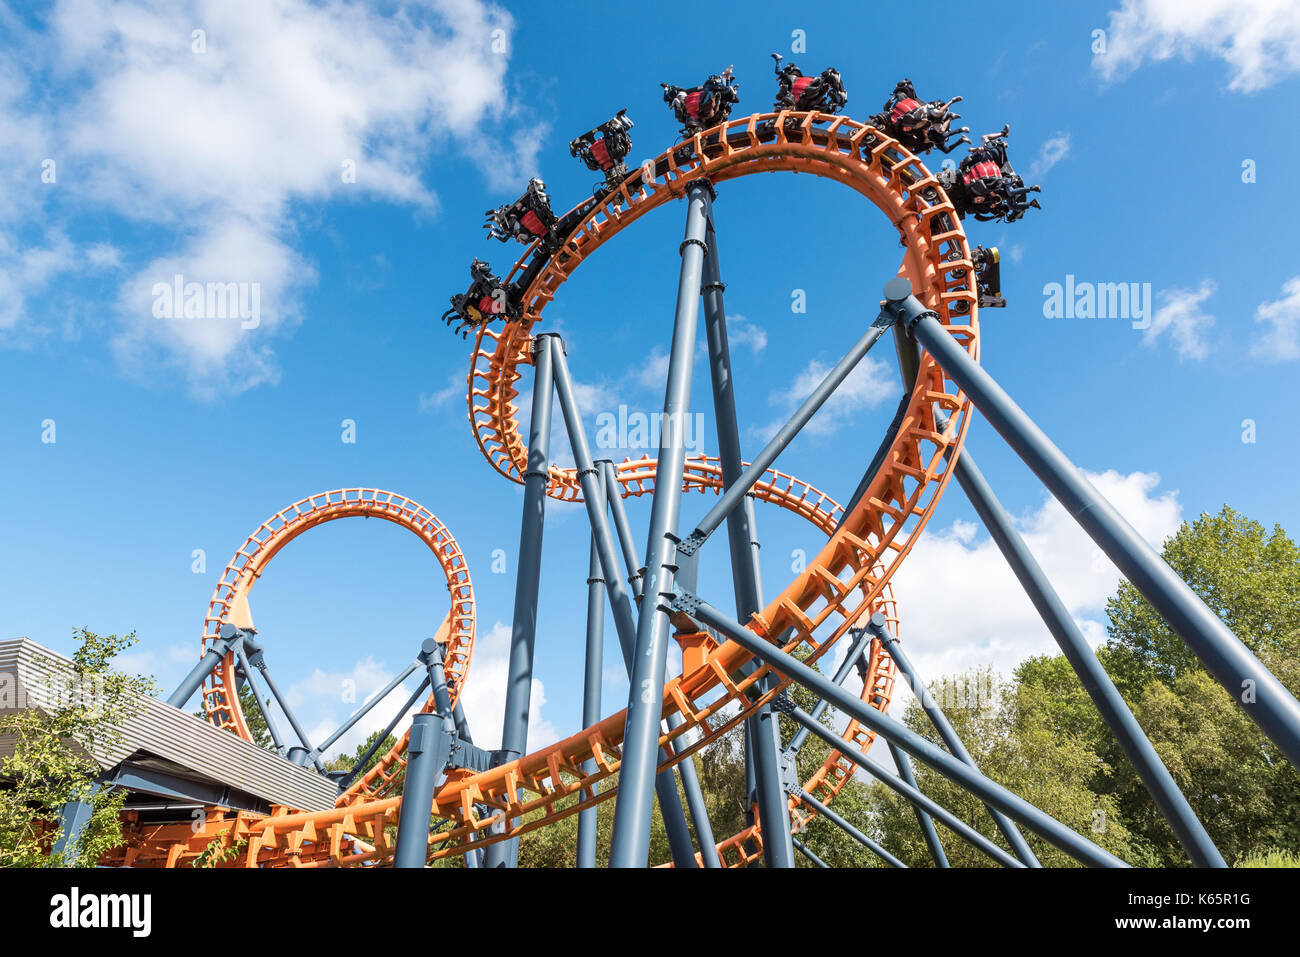 Ferris wheel and roller coaster, France Stock Photo - Alamy